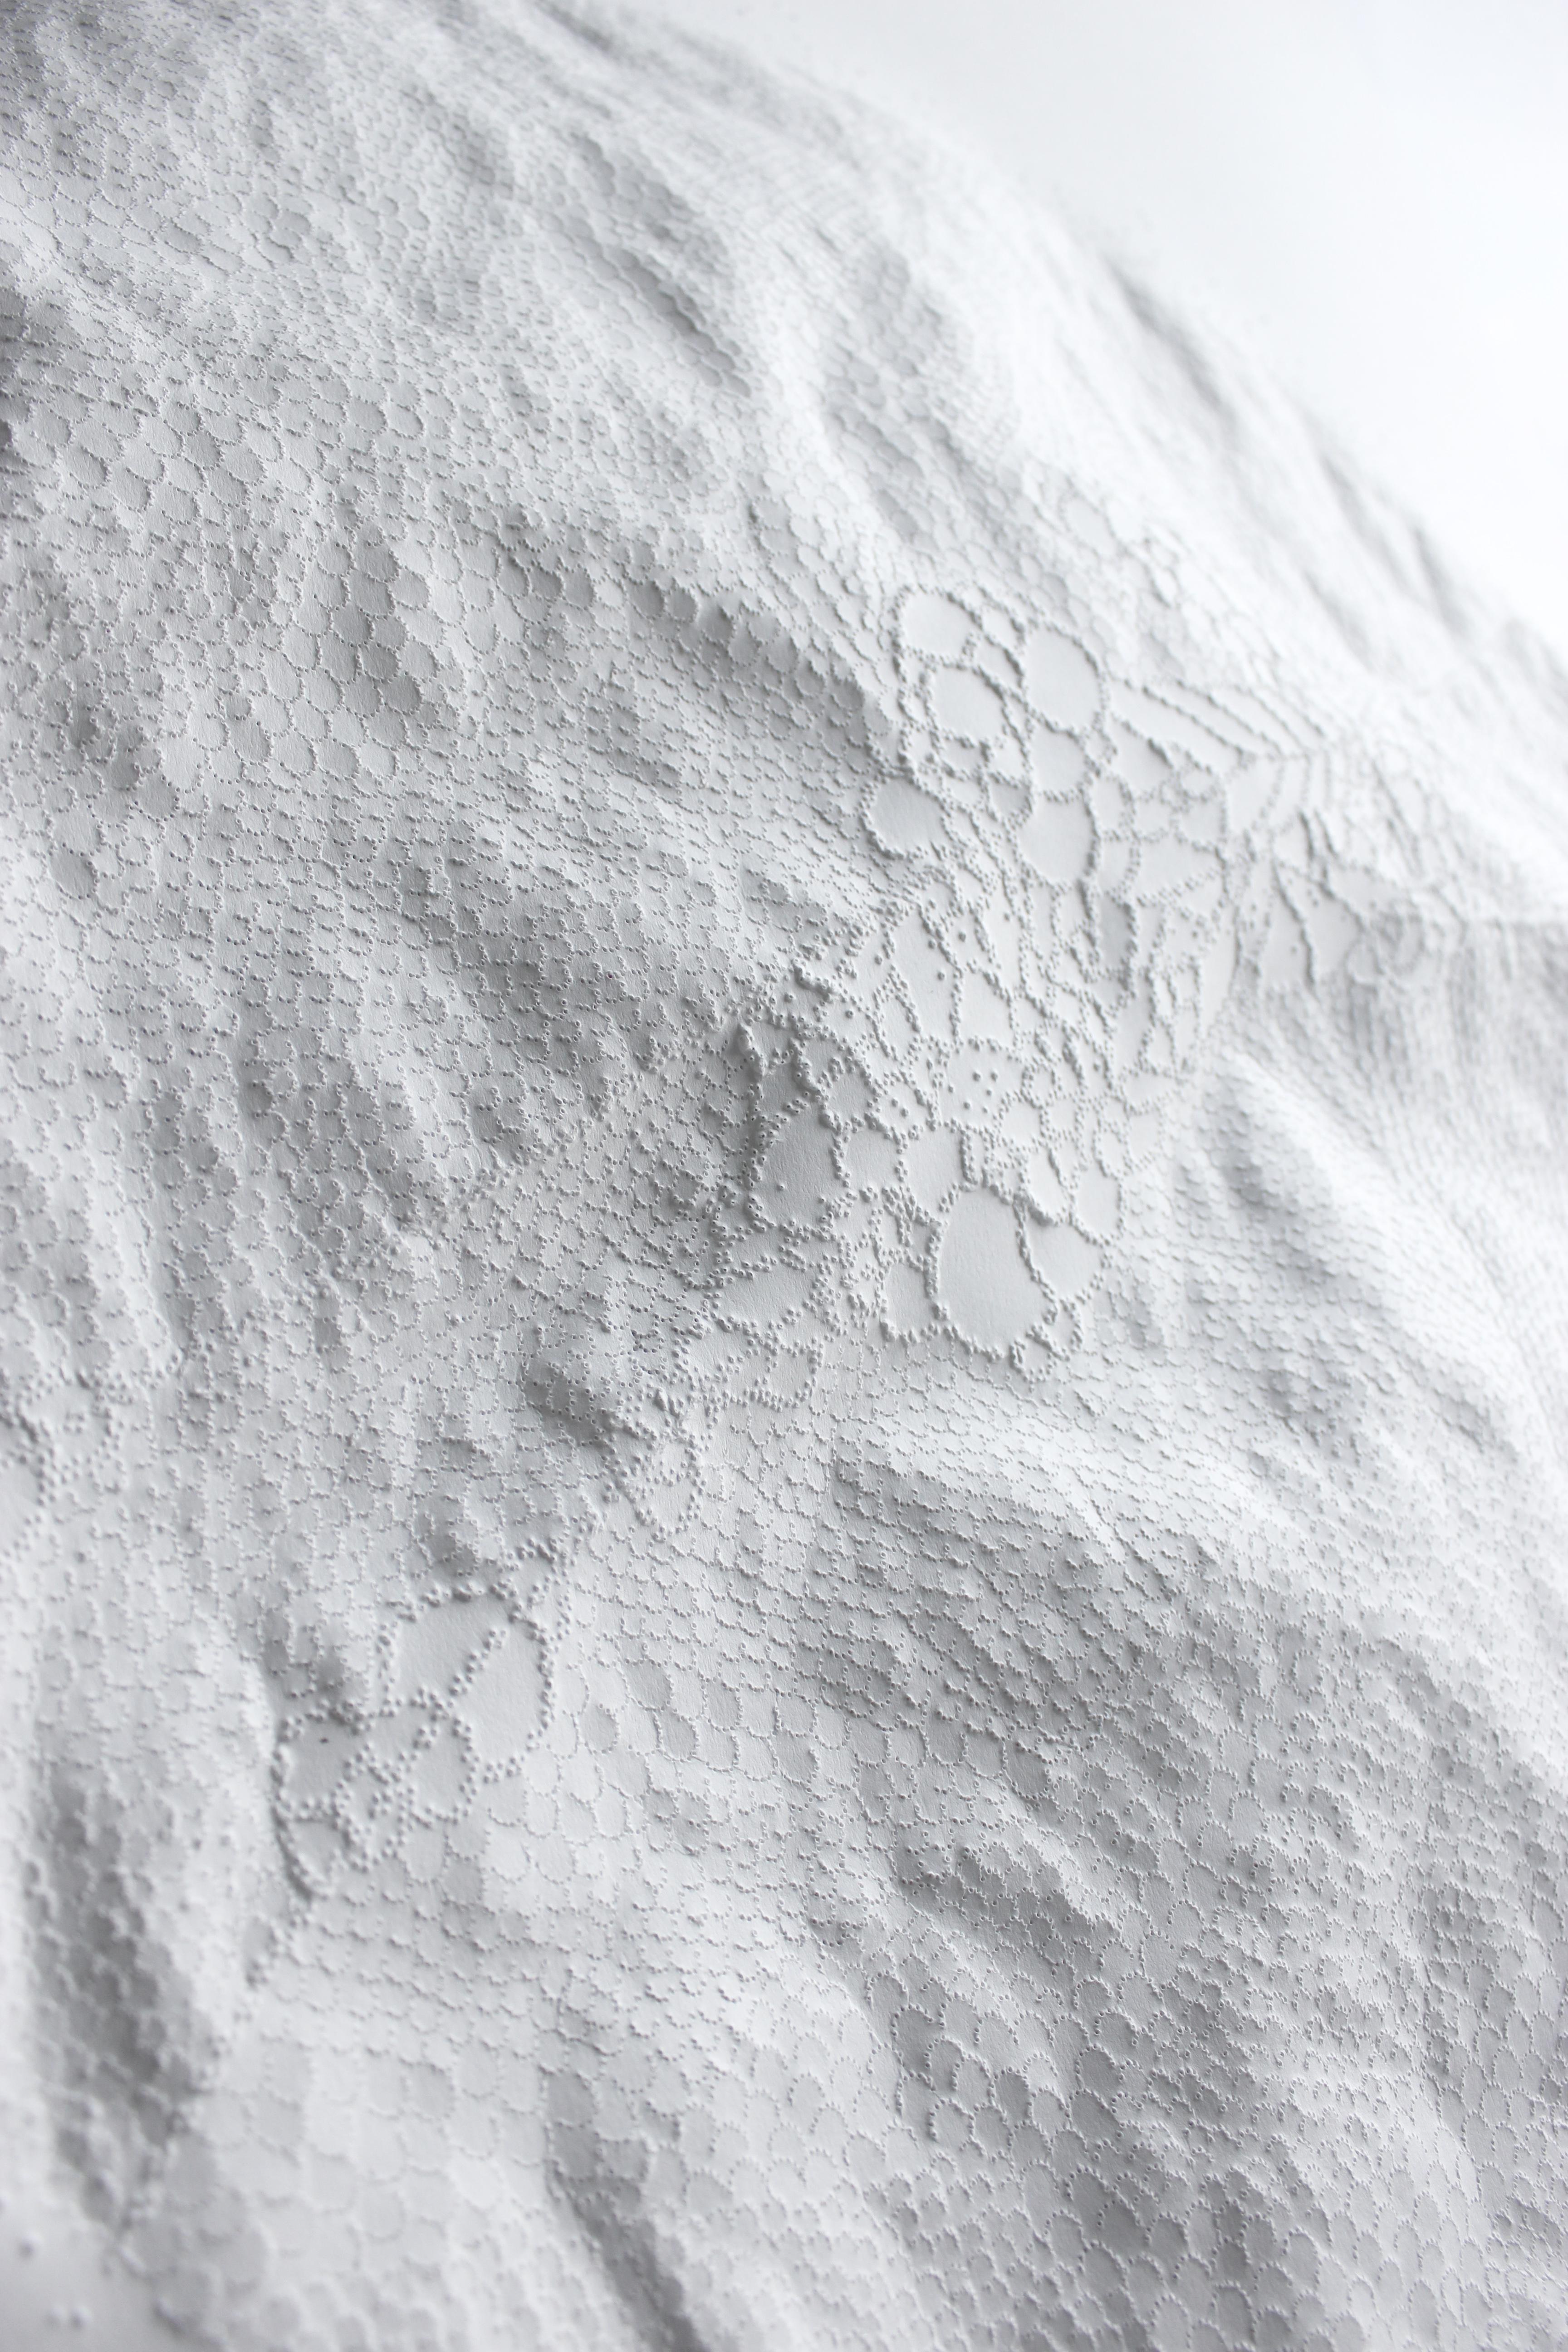 EC 16 - textural abstract circle shape nature inspired white sculpted paper - Sculpture by Anne-Charlotte Saliba